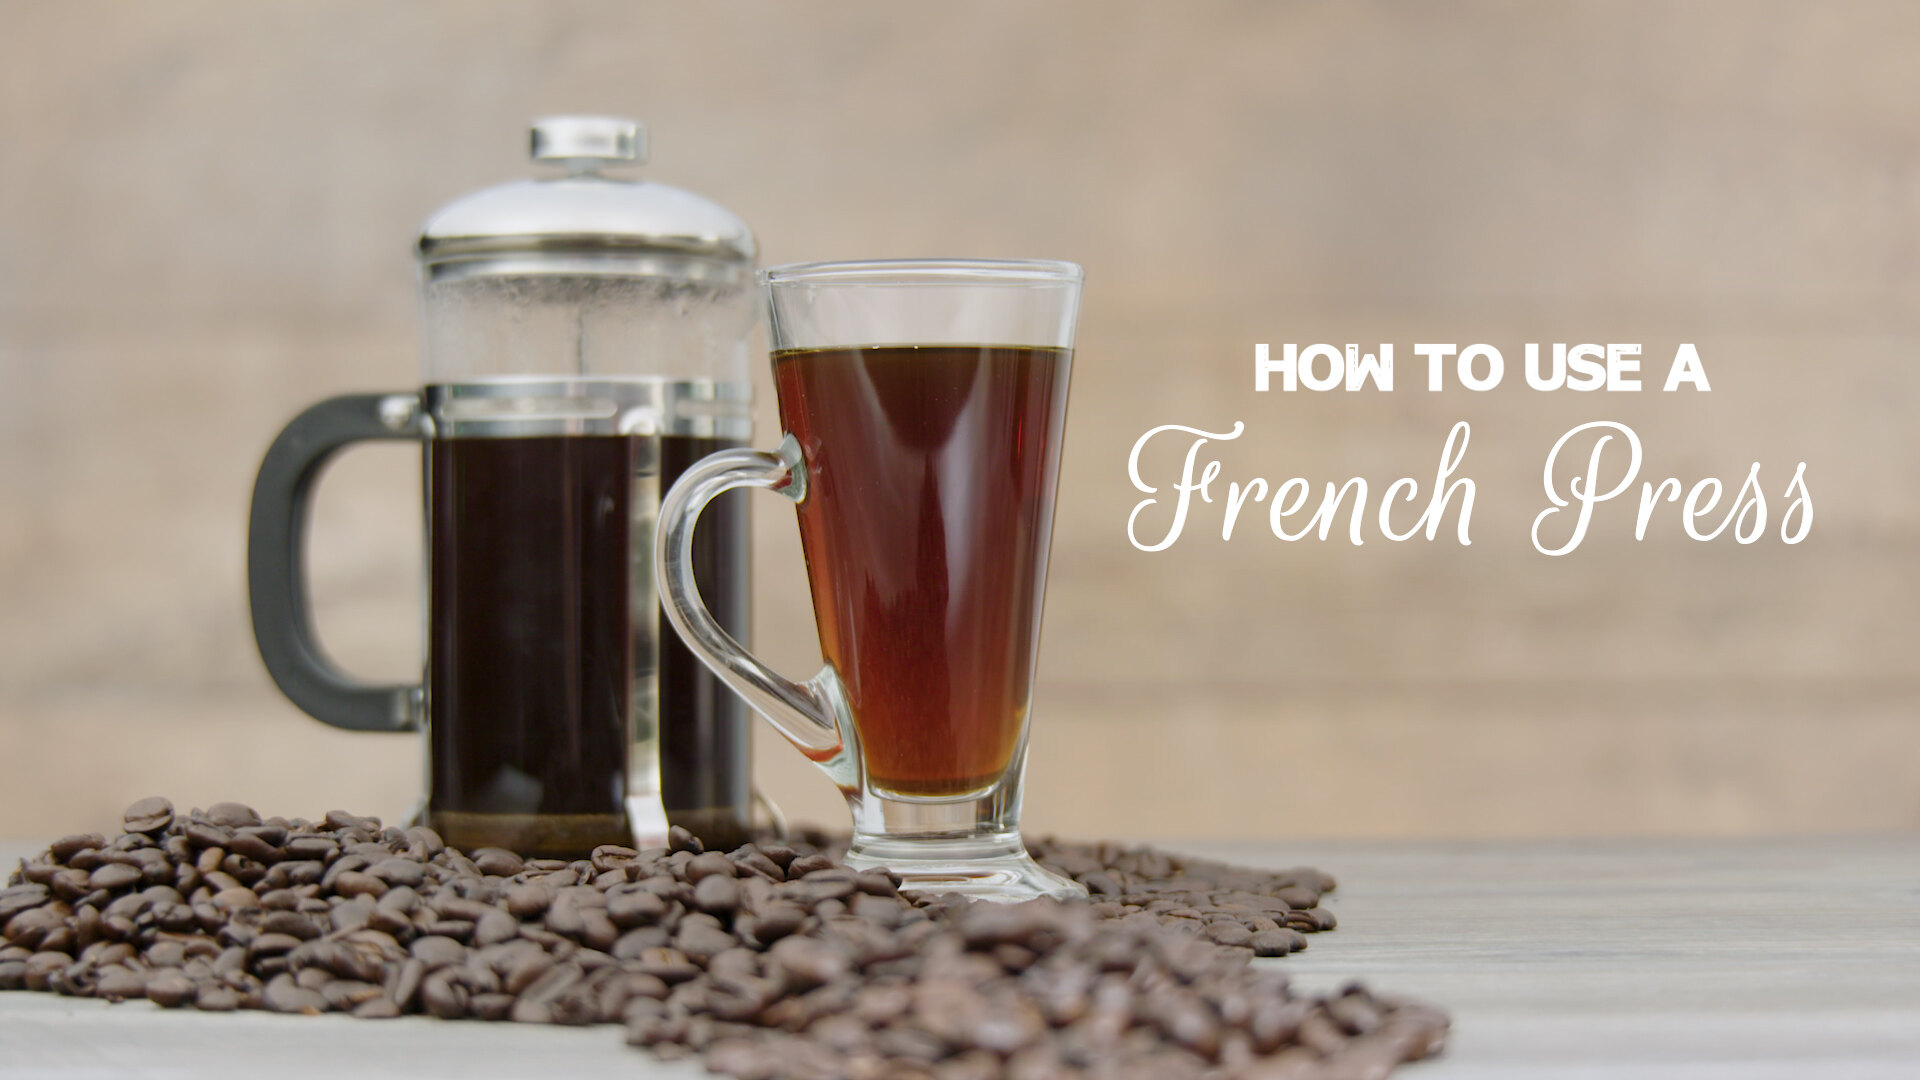 How to Use a French Press to Make Coffee, Tea, Broth, and More